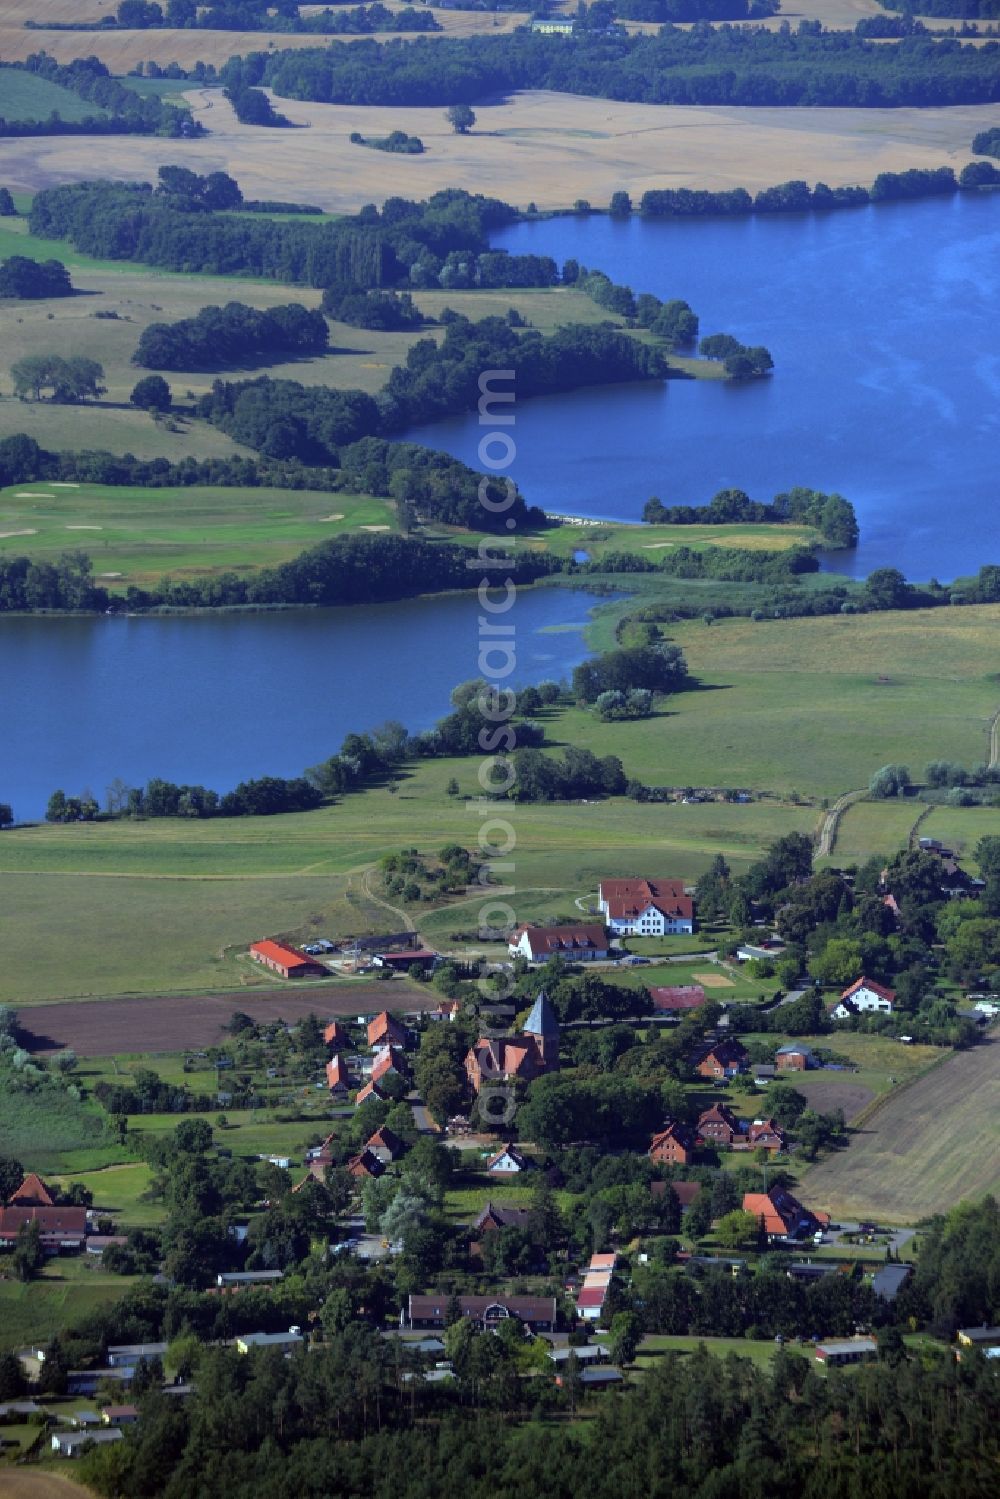 Aerial image Kuchelmiß - View of the Serrahn part of the Krakow Lake District in the borough of Kuchelmiss in the state of Mecklenburg - Western Pomerania. The landscape consists of several lakes and islands. Serrahn is located on the shore of Lake Serrahner See and Krakow Untersee in the background